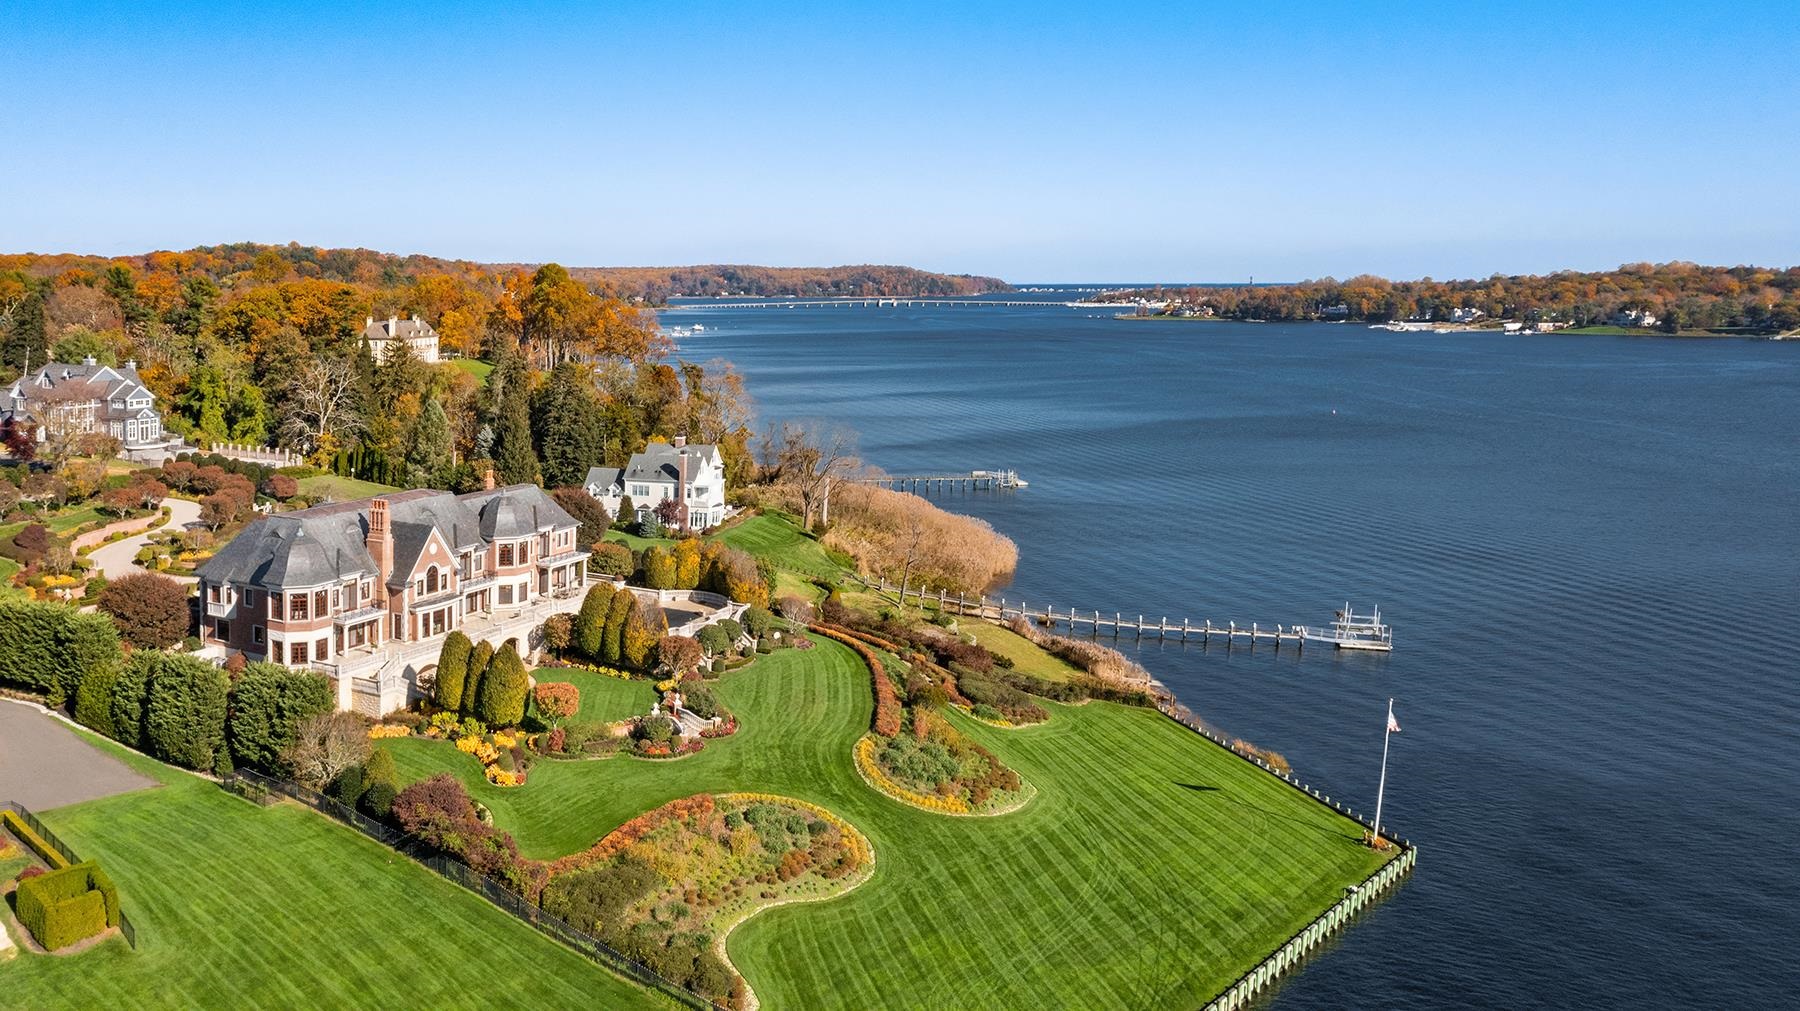 This elite, waterfront chateau, custom-built with the finest materials and bespoke craftsmanship, is unmatched by even the most respected homebuilders. From its unrivaled position on the banks of the picturesque Navesink River, this lushly landscaped 3.5 acre property boasts over 300 feet of private shoreline complete with a 150-foot Brazilian hardwood dock and boat lift. Constructed from only the most premium of materials from an all slate roof to Stone Legends exterior trim and a poured-concrete foundation, the design elements of this extraordinary home are unparalleled. Tischler windows and exterior doors, solid mahogany hand-crafted millwork, radiant heated floors, elevator and smart home technology are just a few of the stunning features that puts this home in a league of its own.  This majestic home has a grand, yet unassumingly intimate feel. Optimally situated at the end of a prestigious cul-de-sac, the winding stone drive from the gated entry leads to a grand paver stone courtyard with four-car garage and porte cochere. Inside, nearly every room basks in southern exposure and riverfront views. Formal great room and expansive dining room lead to a world-class kitchen, breakfast room and inviting family room. A massive game room with billiards, wet bar and poker chamber opens to a stately home office. Above, a sprawling owner's wing lies adjacent to four additional bedroom suites and separate staff quarters. The 6,000+ square feet garden level, designed as a Parisian hideaway, includes a movie theatre, gym, indoor spa, sauna, a pub-style bar and wine cellar. Outside, rolling lawns, verandas, multi-level terraces and a luxurious pool complete the waterfront lifestyle. Located just under fifty miles outside of Manhattan, this distinguished estate is a short drive to ocean beaches, golf and beach clubs, airports, heliports, high-speed ferries and trains.